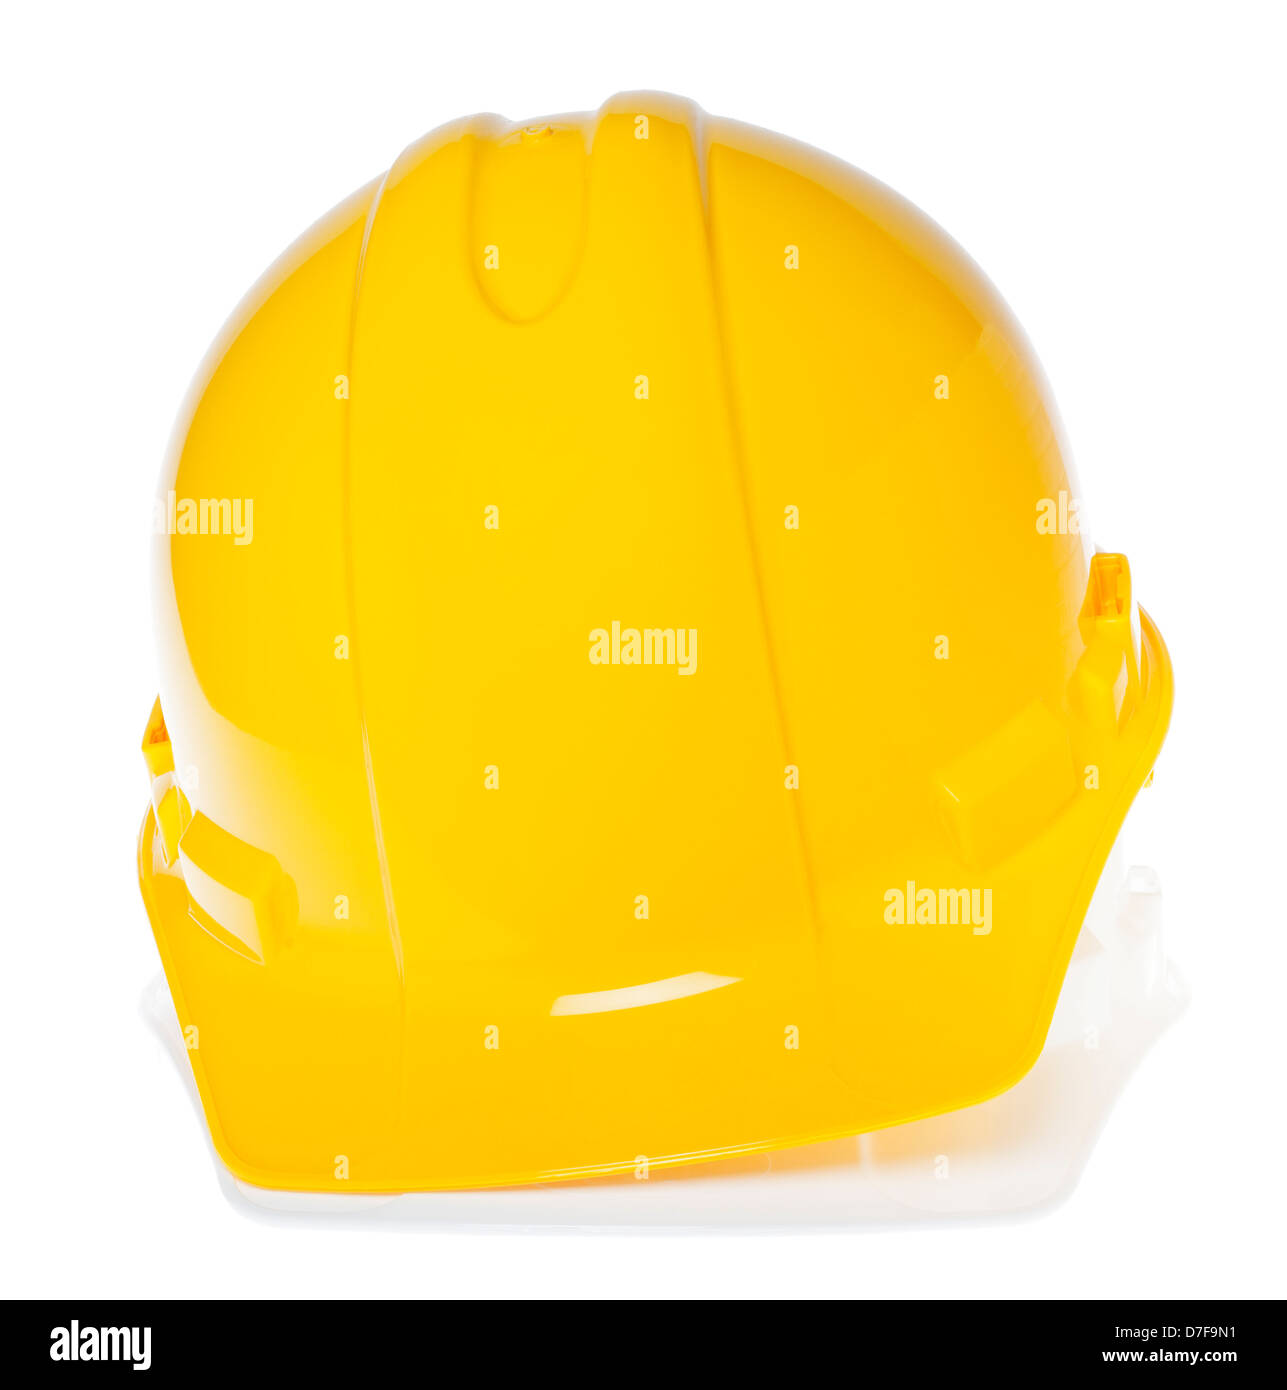 Frontal view of two hard hats, yellow on top of white, isolated on white background. Stock Photo